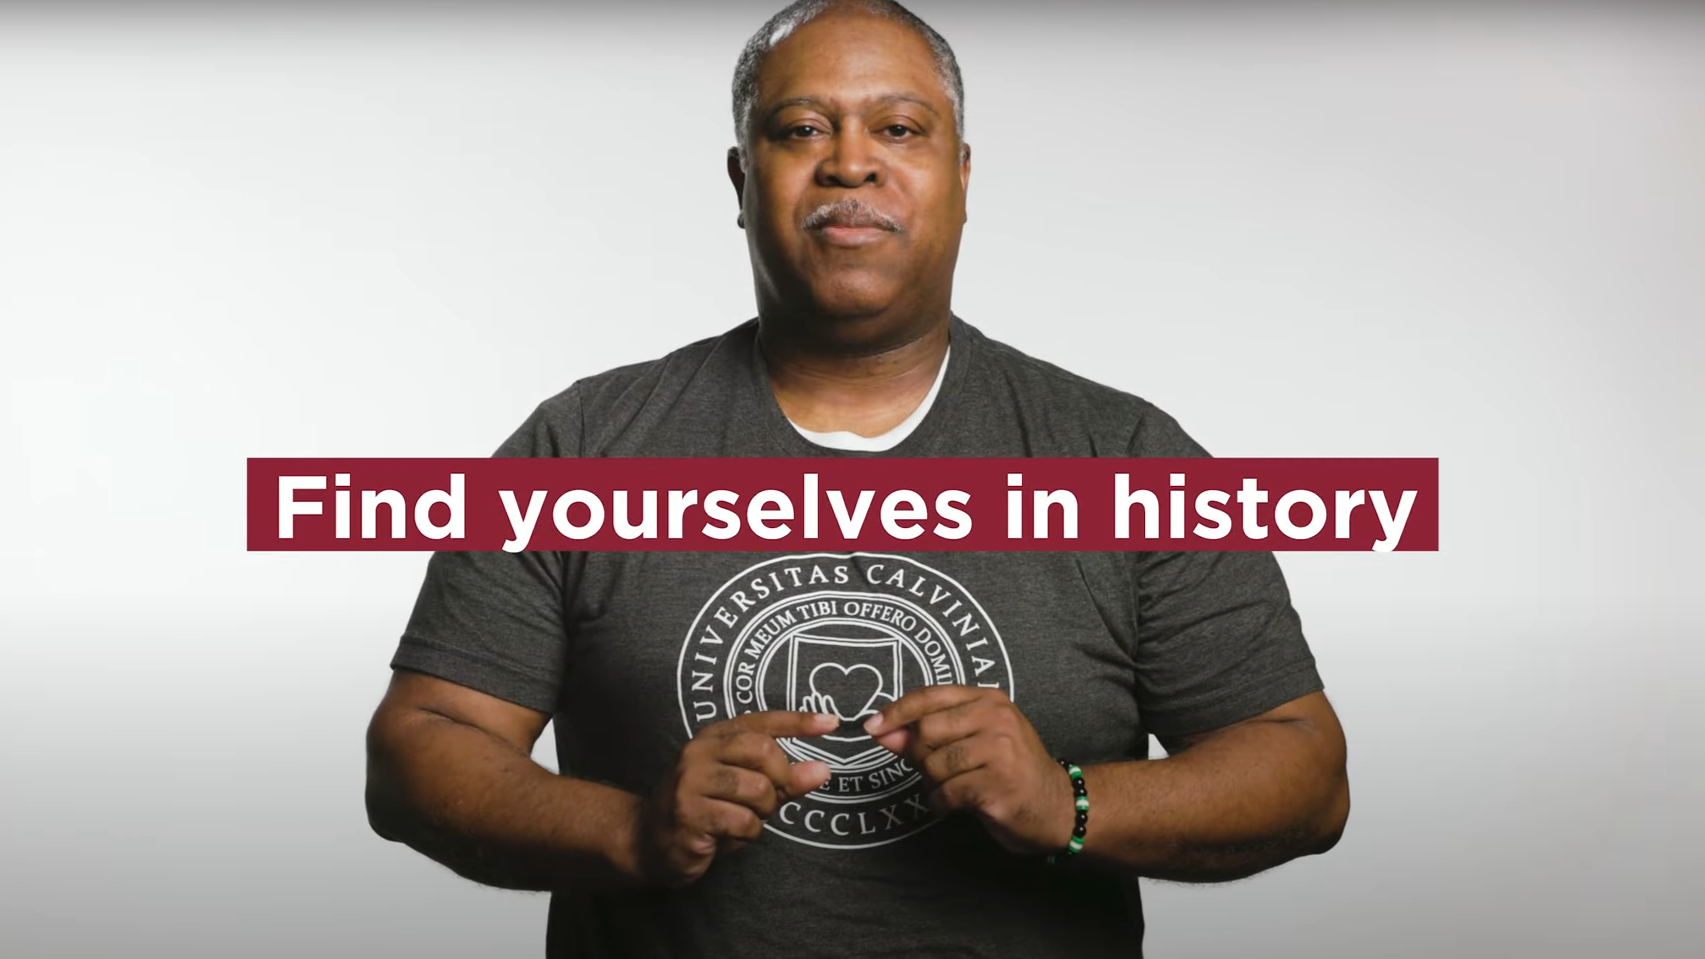 Prof Washington challenging viewers to find themselves in history